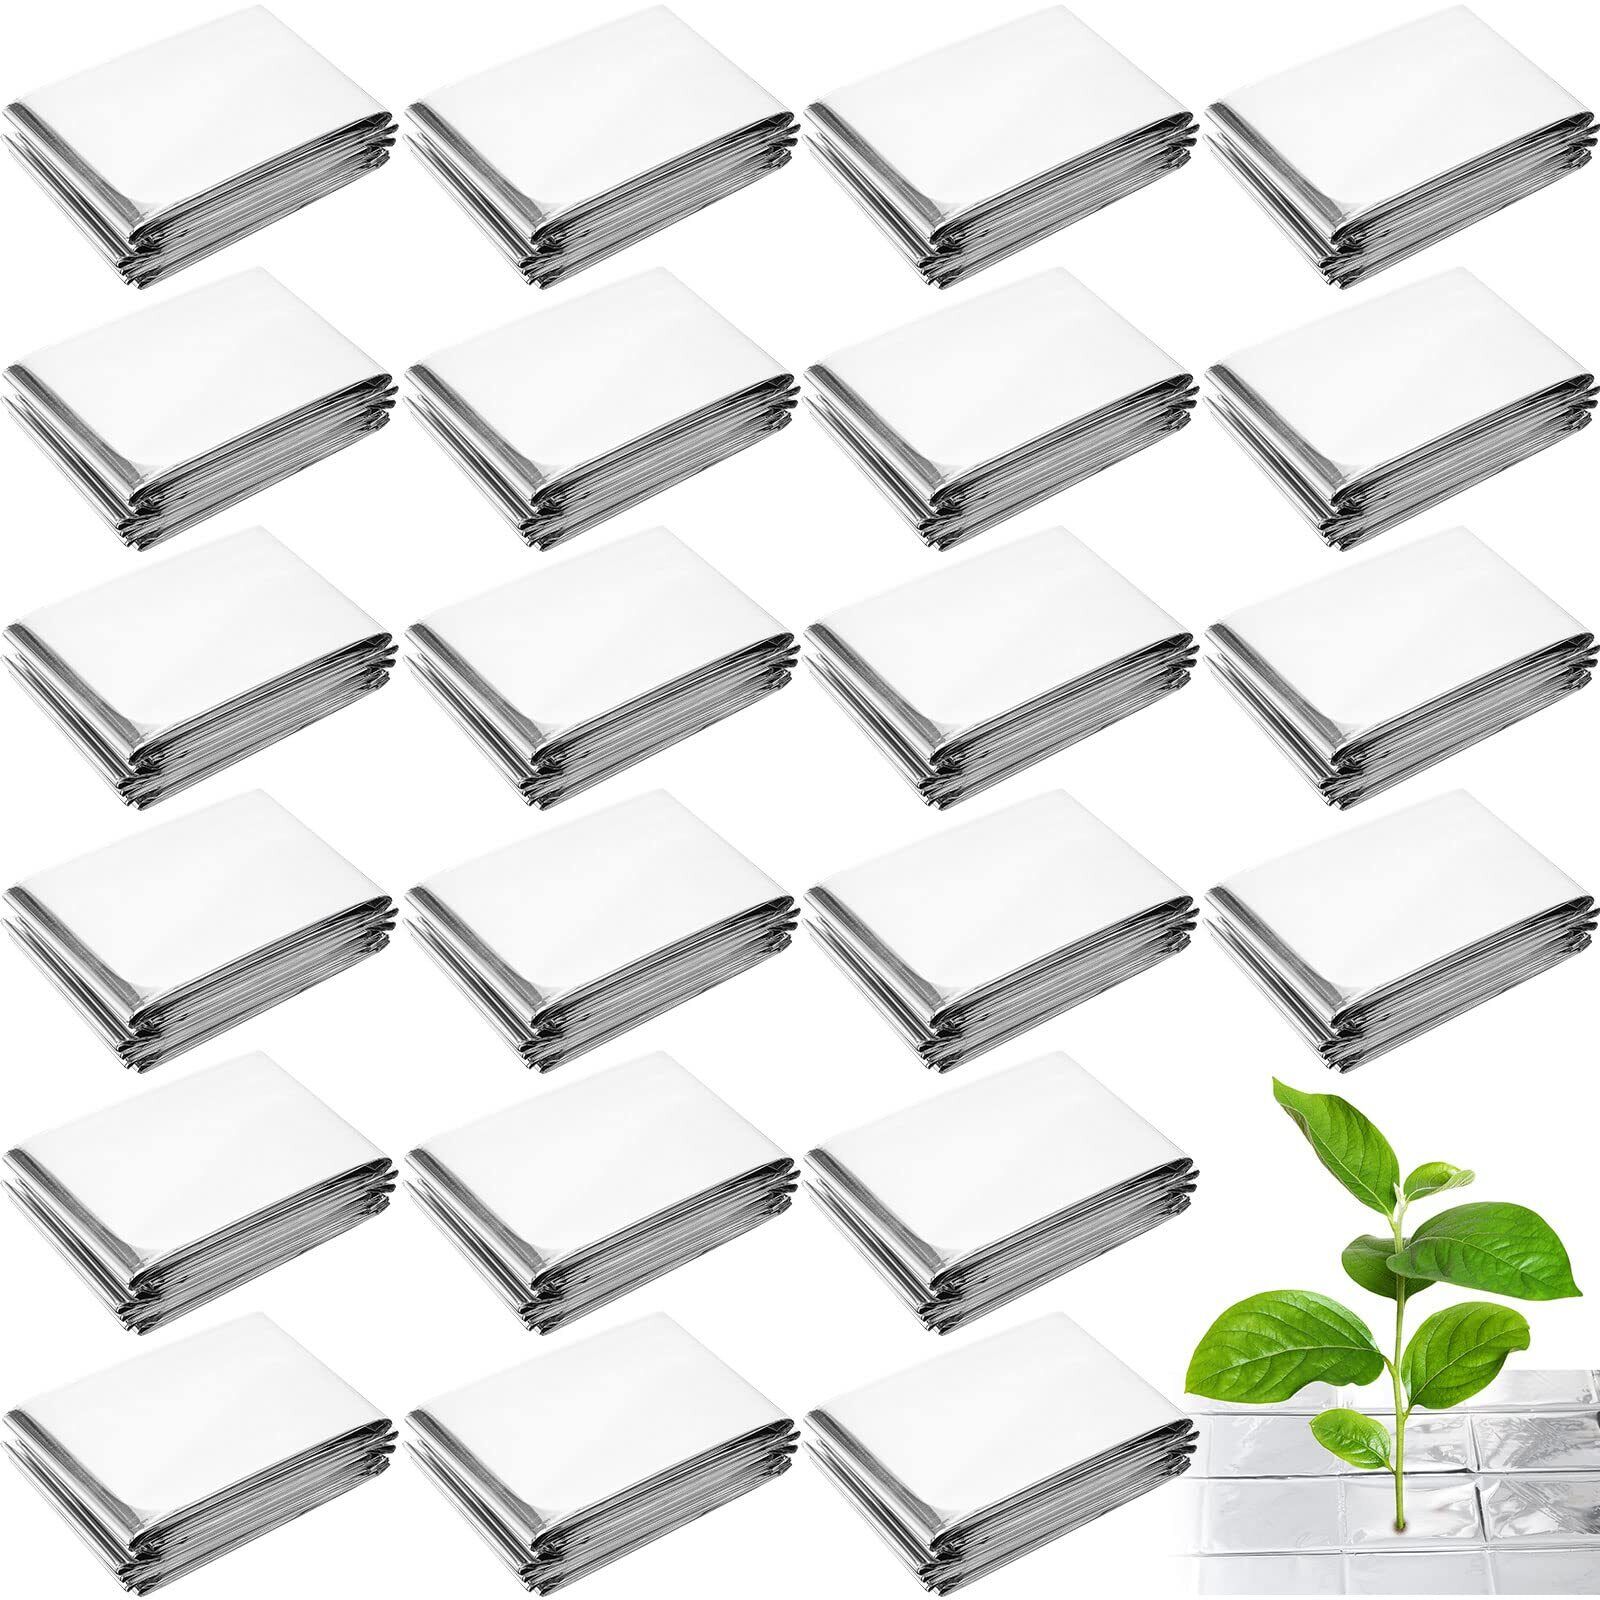 24 Packs High Silver Reflective Film Sheets 83 x 51 Inch Plant Garden Greenho...